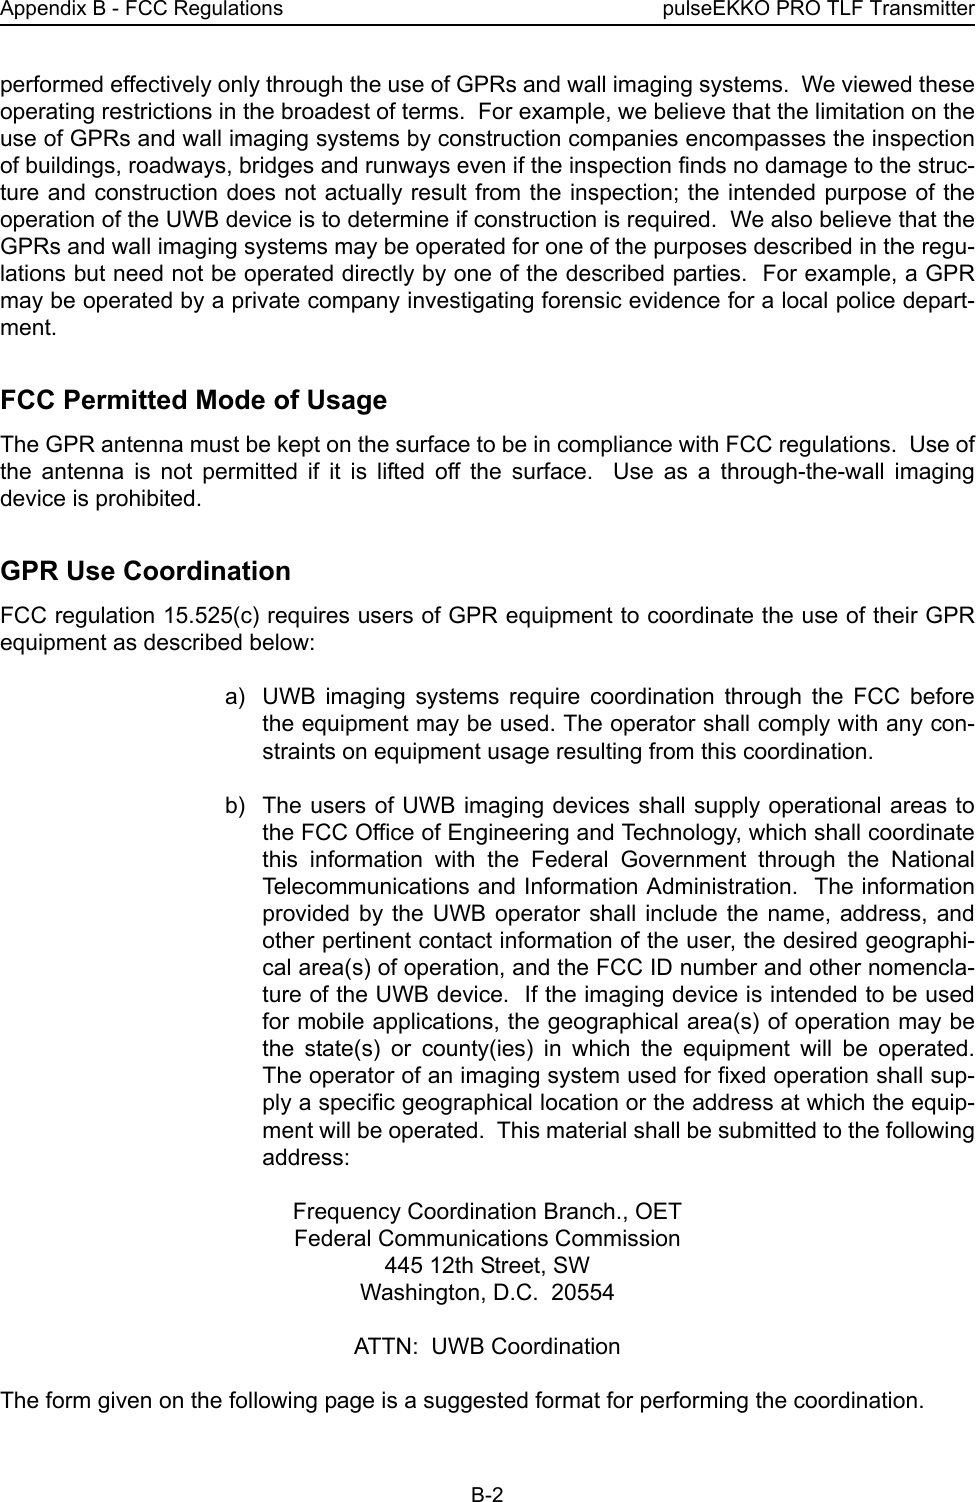 Appendix B - FCC Regulations pulseEKKO PRO TLF TransmitterB-2performed effectively only through the use of GPRs and wall imaging systems.  We viewed theseoperating restrictions in the broadest of terms.  For example, we believe that the limitation on theuse of GPRs and wall imaging systems by construction companies encompasses the inspectionof buildings, roadways, bridges and runways even if the inspection finds no damage to the struc-ture and construction does not actually result from the inspection; the intended purpose of theoperation of the UWB device is to determine if construction is required.  We also believe that theGPRs and wall imaging systems may be operated for one of the purposes described in the regu-lations but need not be operated directly by one of the described parties.  For example, a GPRmay be operated by a private company investigating forensic evidence for a local police depart-ment.  FCC Permitted Mode of UsageThe GPR antenna must be kept on the surface to be in compliance with FCC regulations.  Use ofthe antenna is not permitted if it is lifted off the surface.  Use as a through-the-wall imagingdevice is prohibited.  GPR Use CoordinationFCC regulation 15.525(c) requires users of GPR equipment to coordinate the use of their GPRequipment as described below: a) UWB imaging systems require coordination through the FCC beforethe equipment may be used. The operator shall comply with any con-straints on equipment usage resulting from this coordination. b) The users of UWB imaging devices shall supply operational areas tothe FCC Office of Engineering and Technology, which shall coordinatethis information with the Federal Government through the NationalTelecommunications and Information Administration.  The informationprovided by the UWB operator shall include the name, address, andother pertinent contact information of the user, the desired geographi-cal area(s) of operation, and the FCC ID number and other nomencla-ture of the UWB device.  If the imaging device is intended to be usedfor mobile applications, the geographical area(s) of operation may bethe state(s) or county(ies) in which the equipment will be operated.The operator of an imaging system used for fixed operation shall sup-ply a specific geographical location or the address at which the equip-ment will be operated.  This material shall be submitted to the followingaddress: Frequency Coordination Branch., OETFederal Communications Commission445 12th Street, SWWashington, D.C.  20554ATTN:  UWB CoordinationThe form given on the following page is a suggested format for performing the coordination.